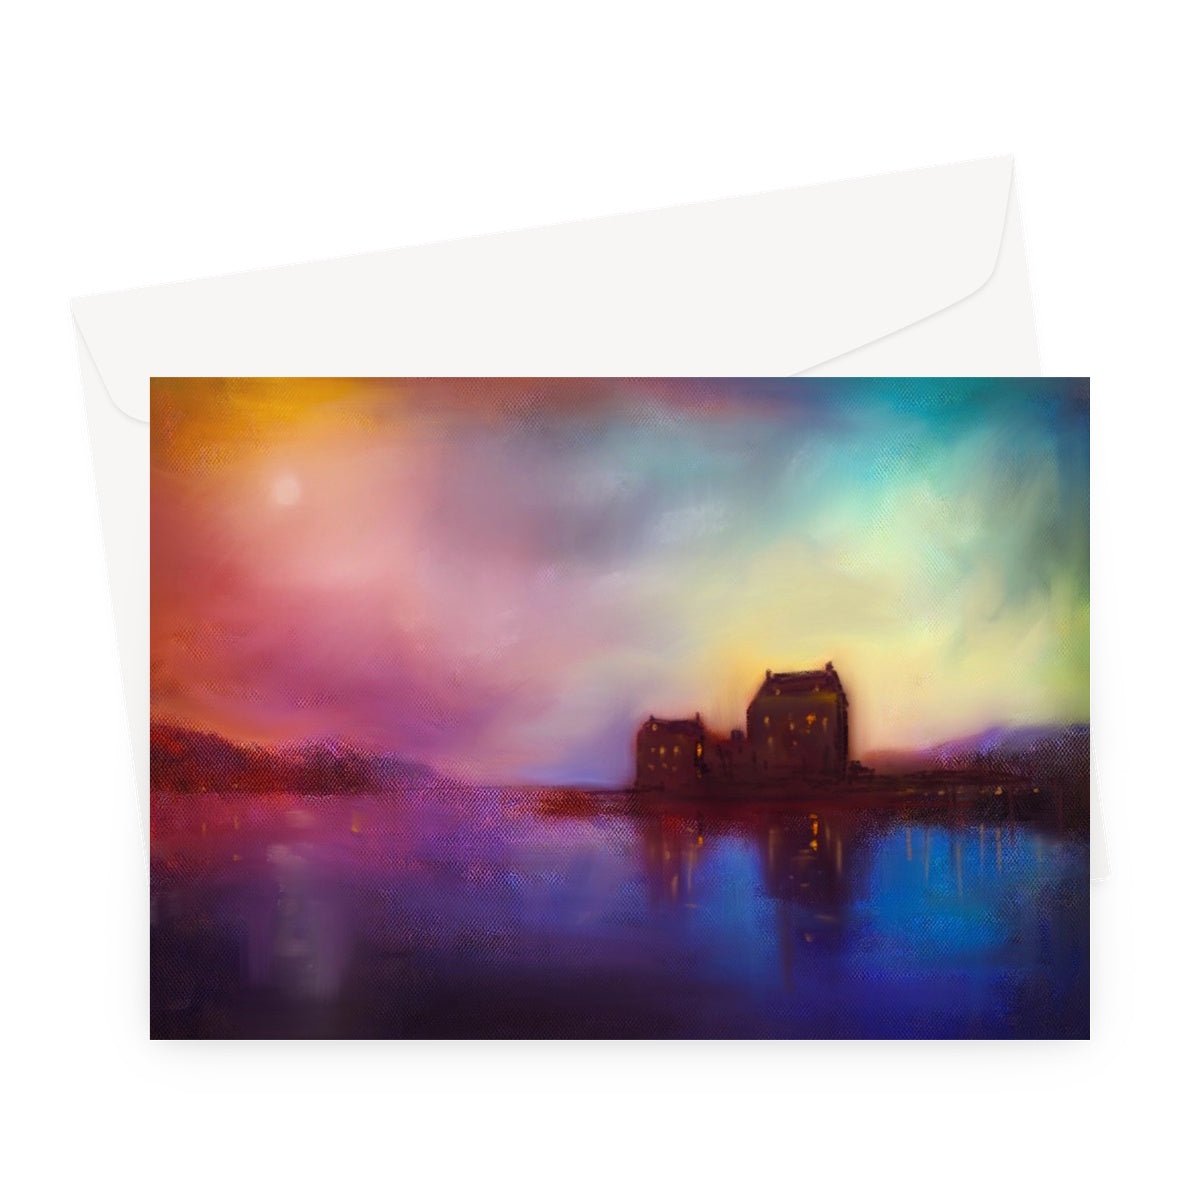 Eilean Donan Castle Sunset Art Gifts Greeting Card-Greetings Cards-Historic & Iconic Scotland Art Gallery-A5 Landscape-10 Cards-Paintings, Prints, Homeware, Art Gifts From Scotland By Scottish Artist Kevin Hunter